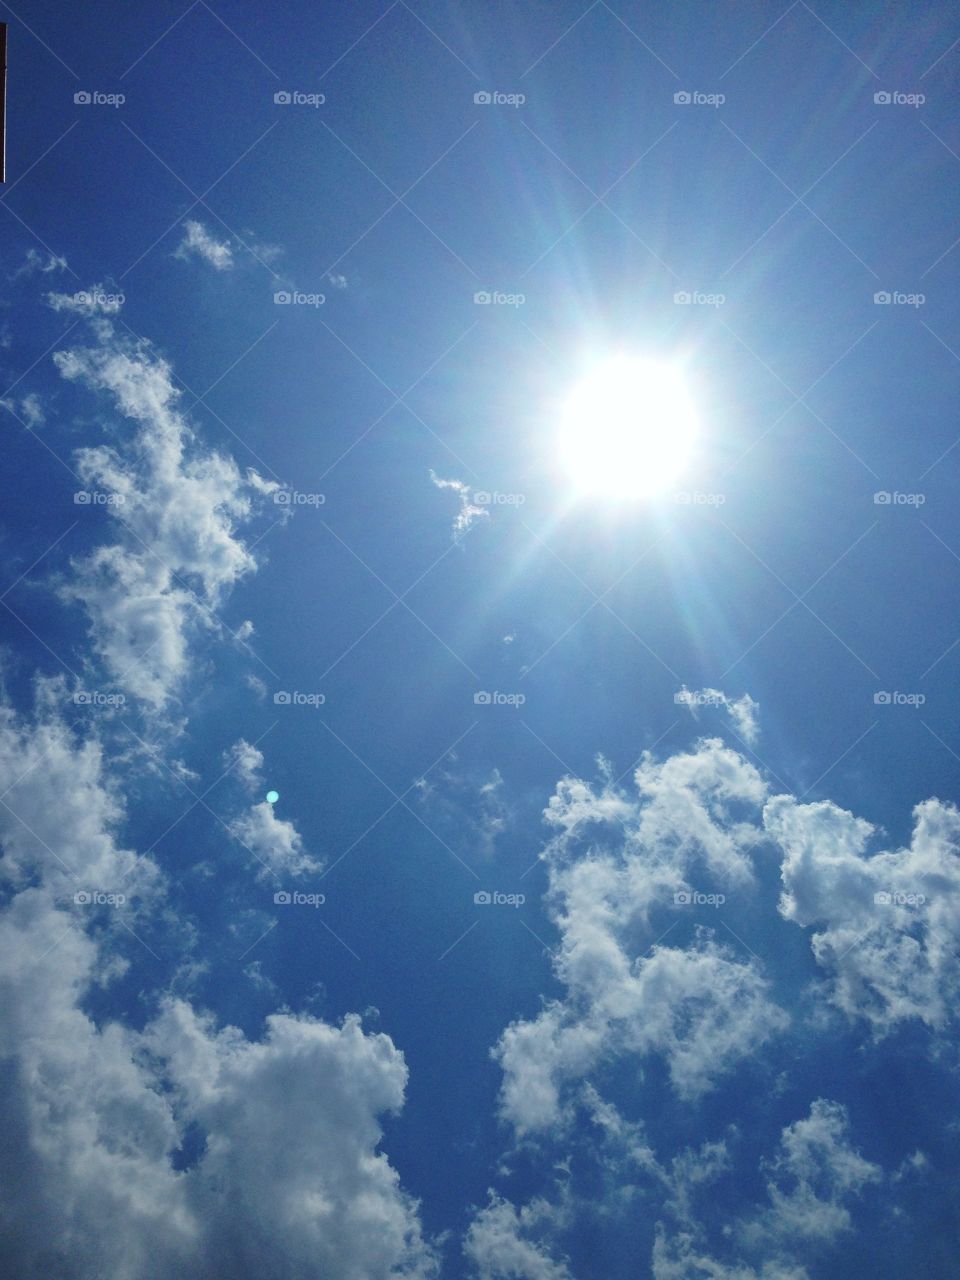 Sun with clouds against blue sky